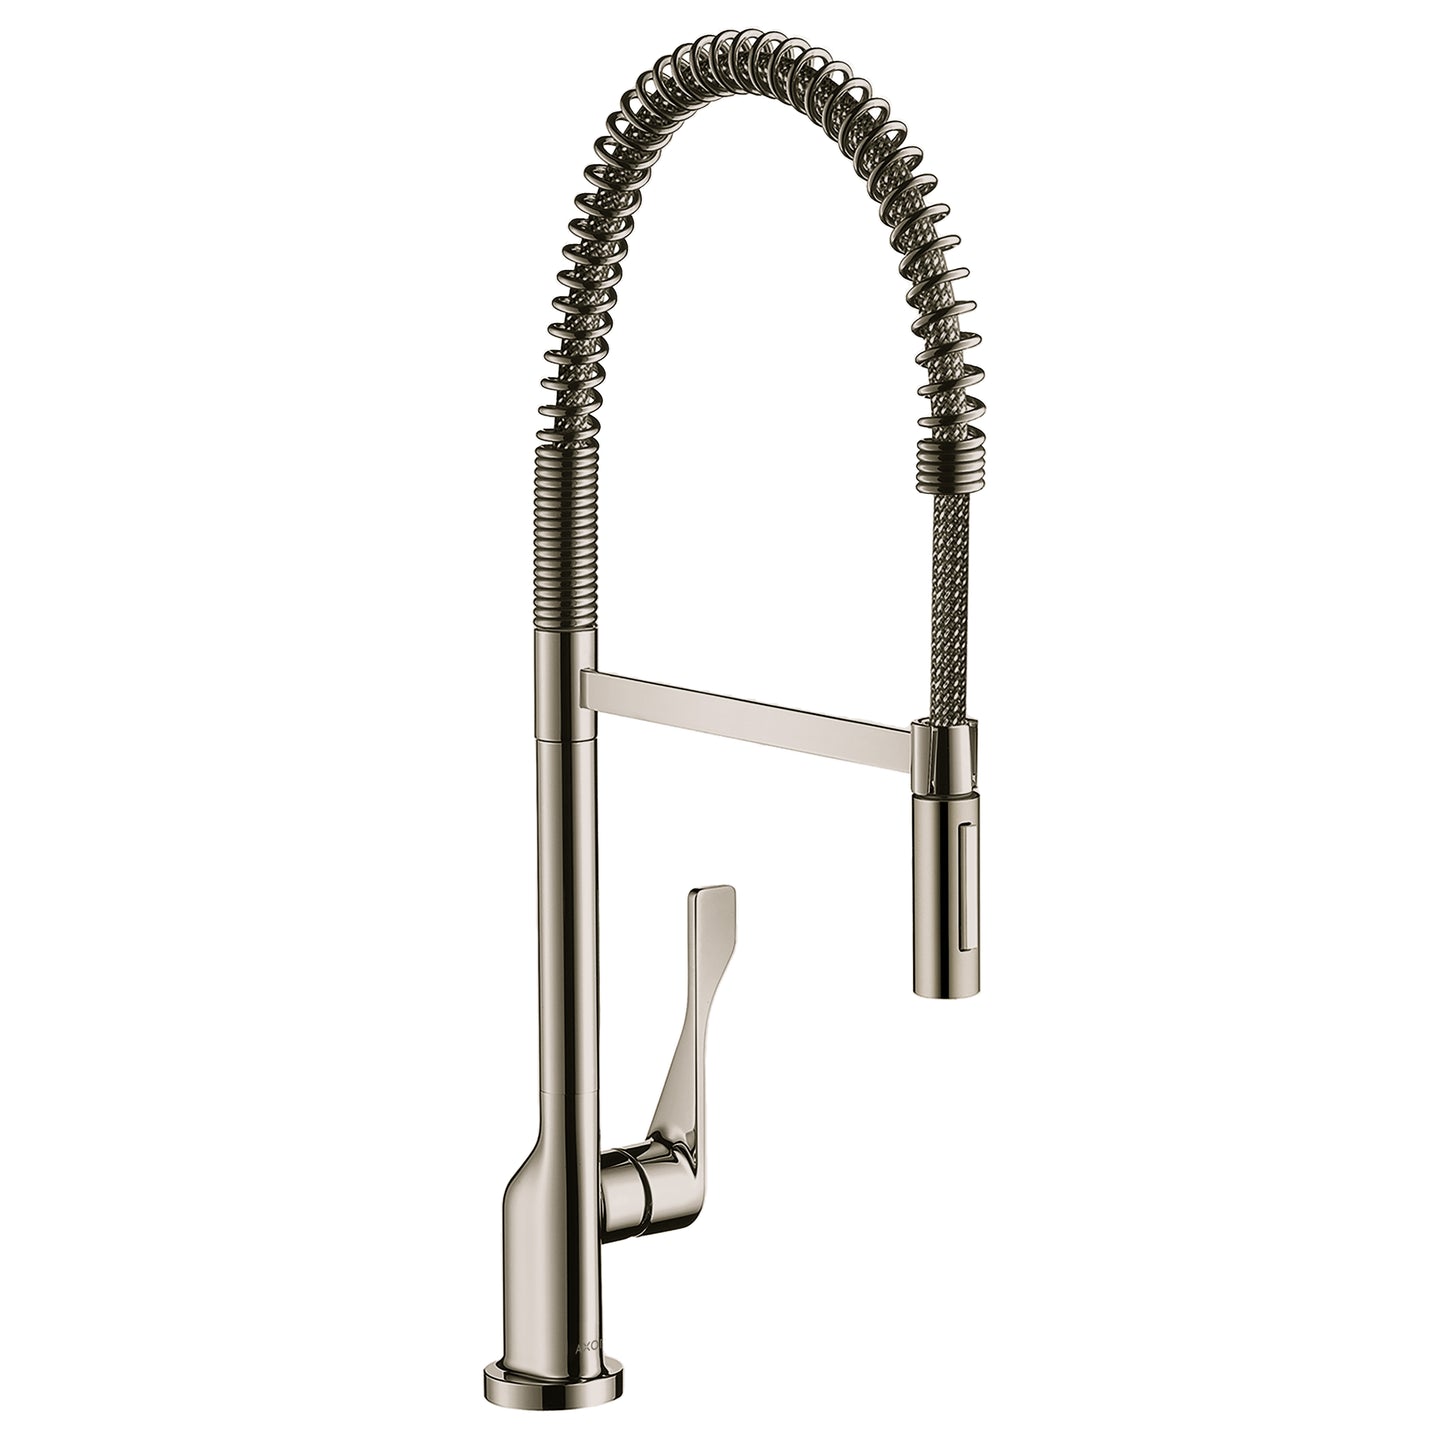 AXOR 39840831 Polished Nickel Citterio Modern Kitchen Faucet 1.75 GPM